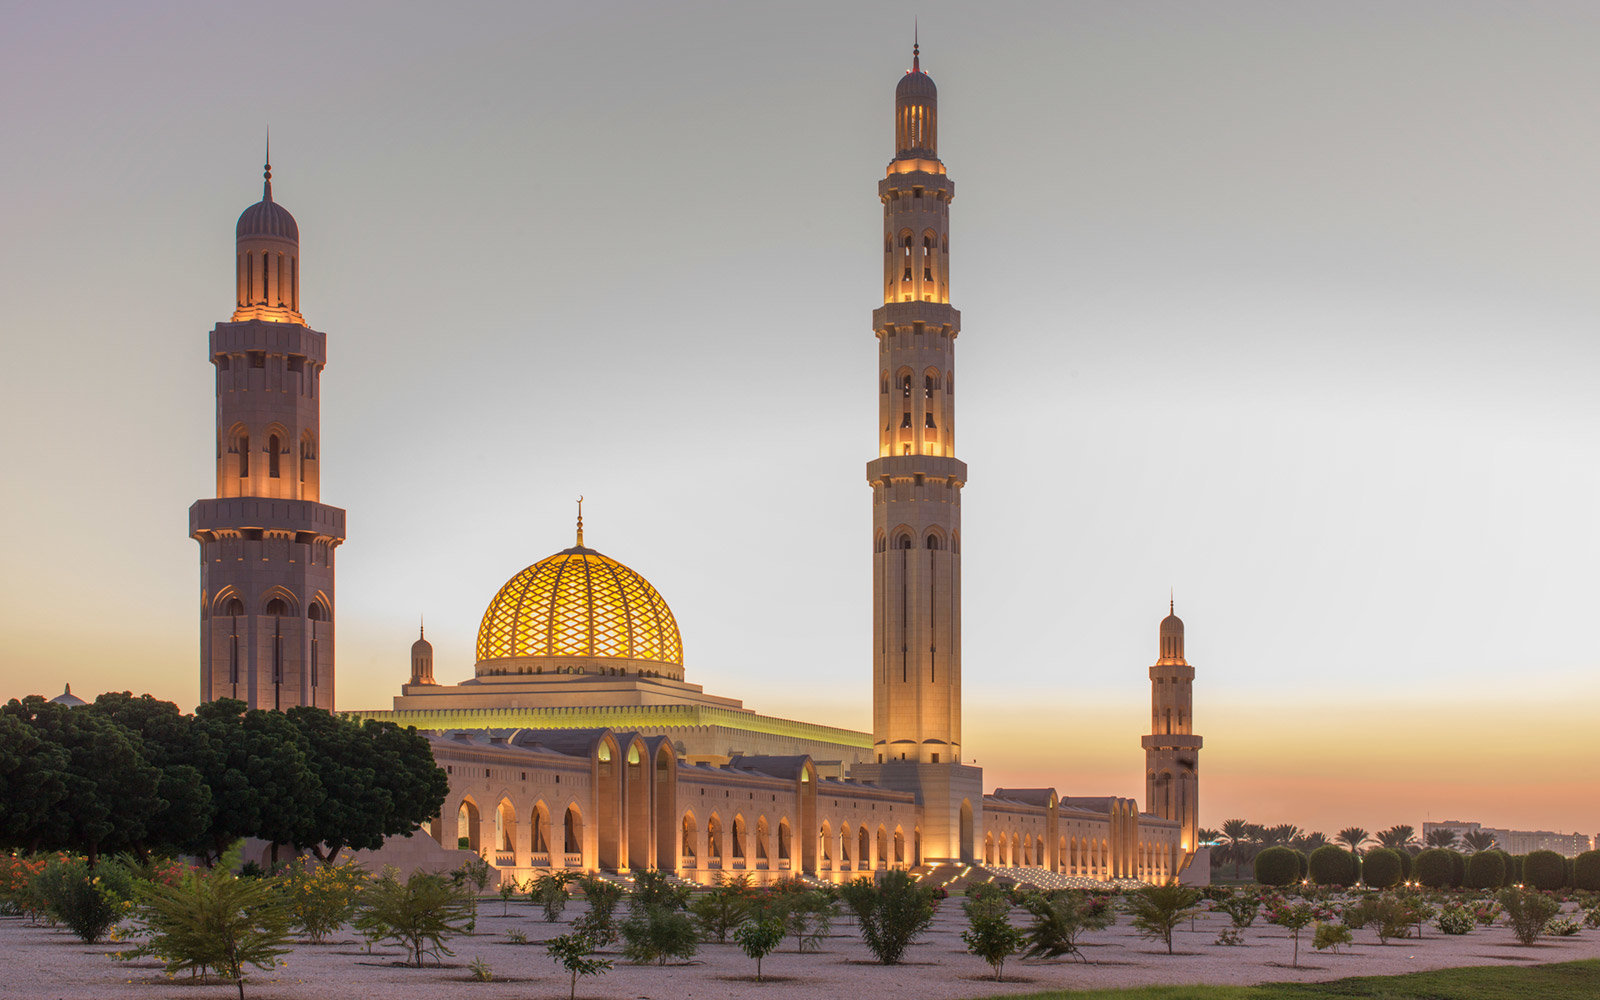 The Sultan Qaboos Grand Mosque, Muscat.